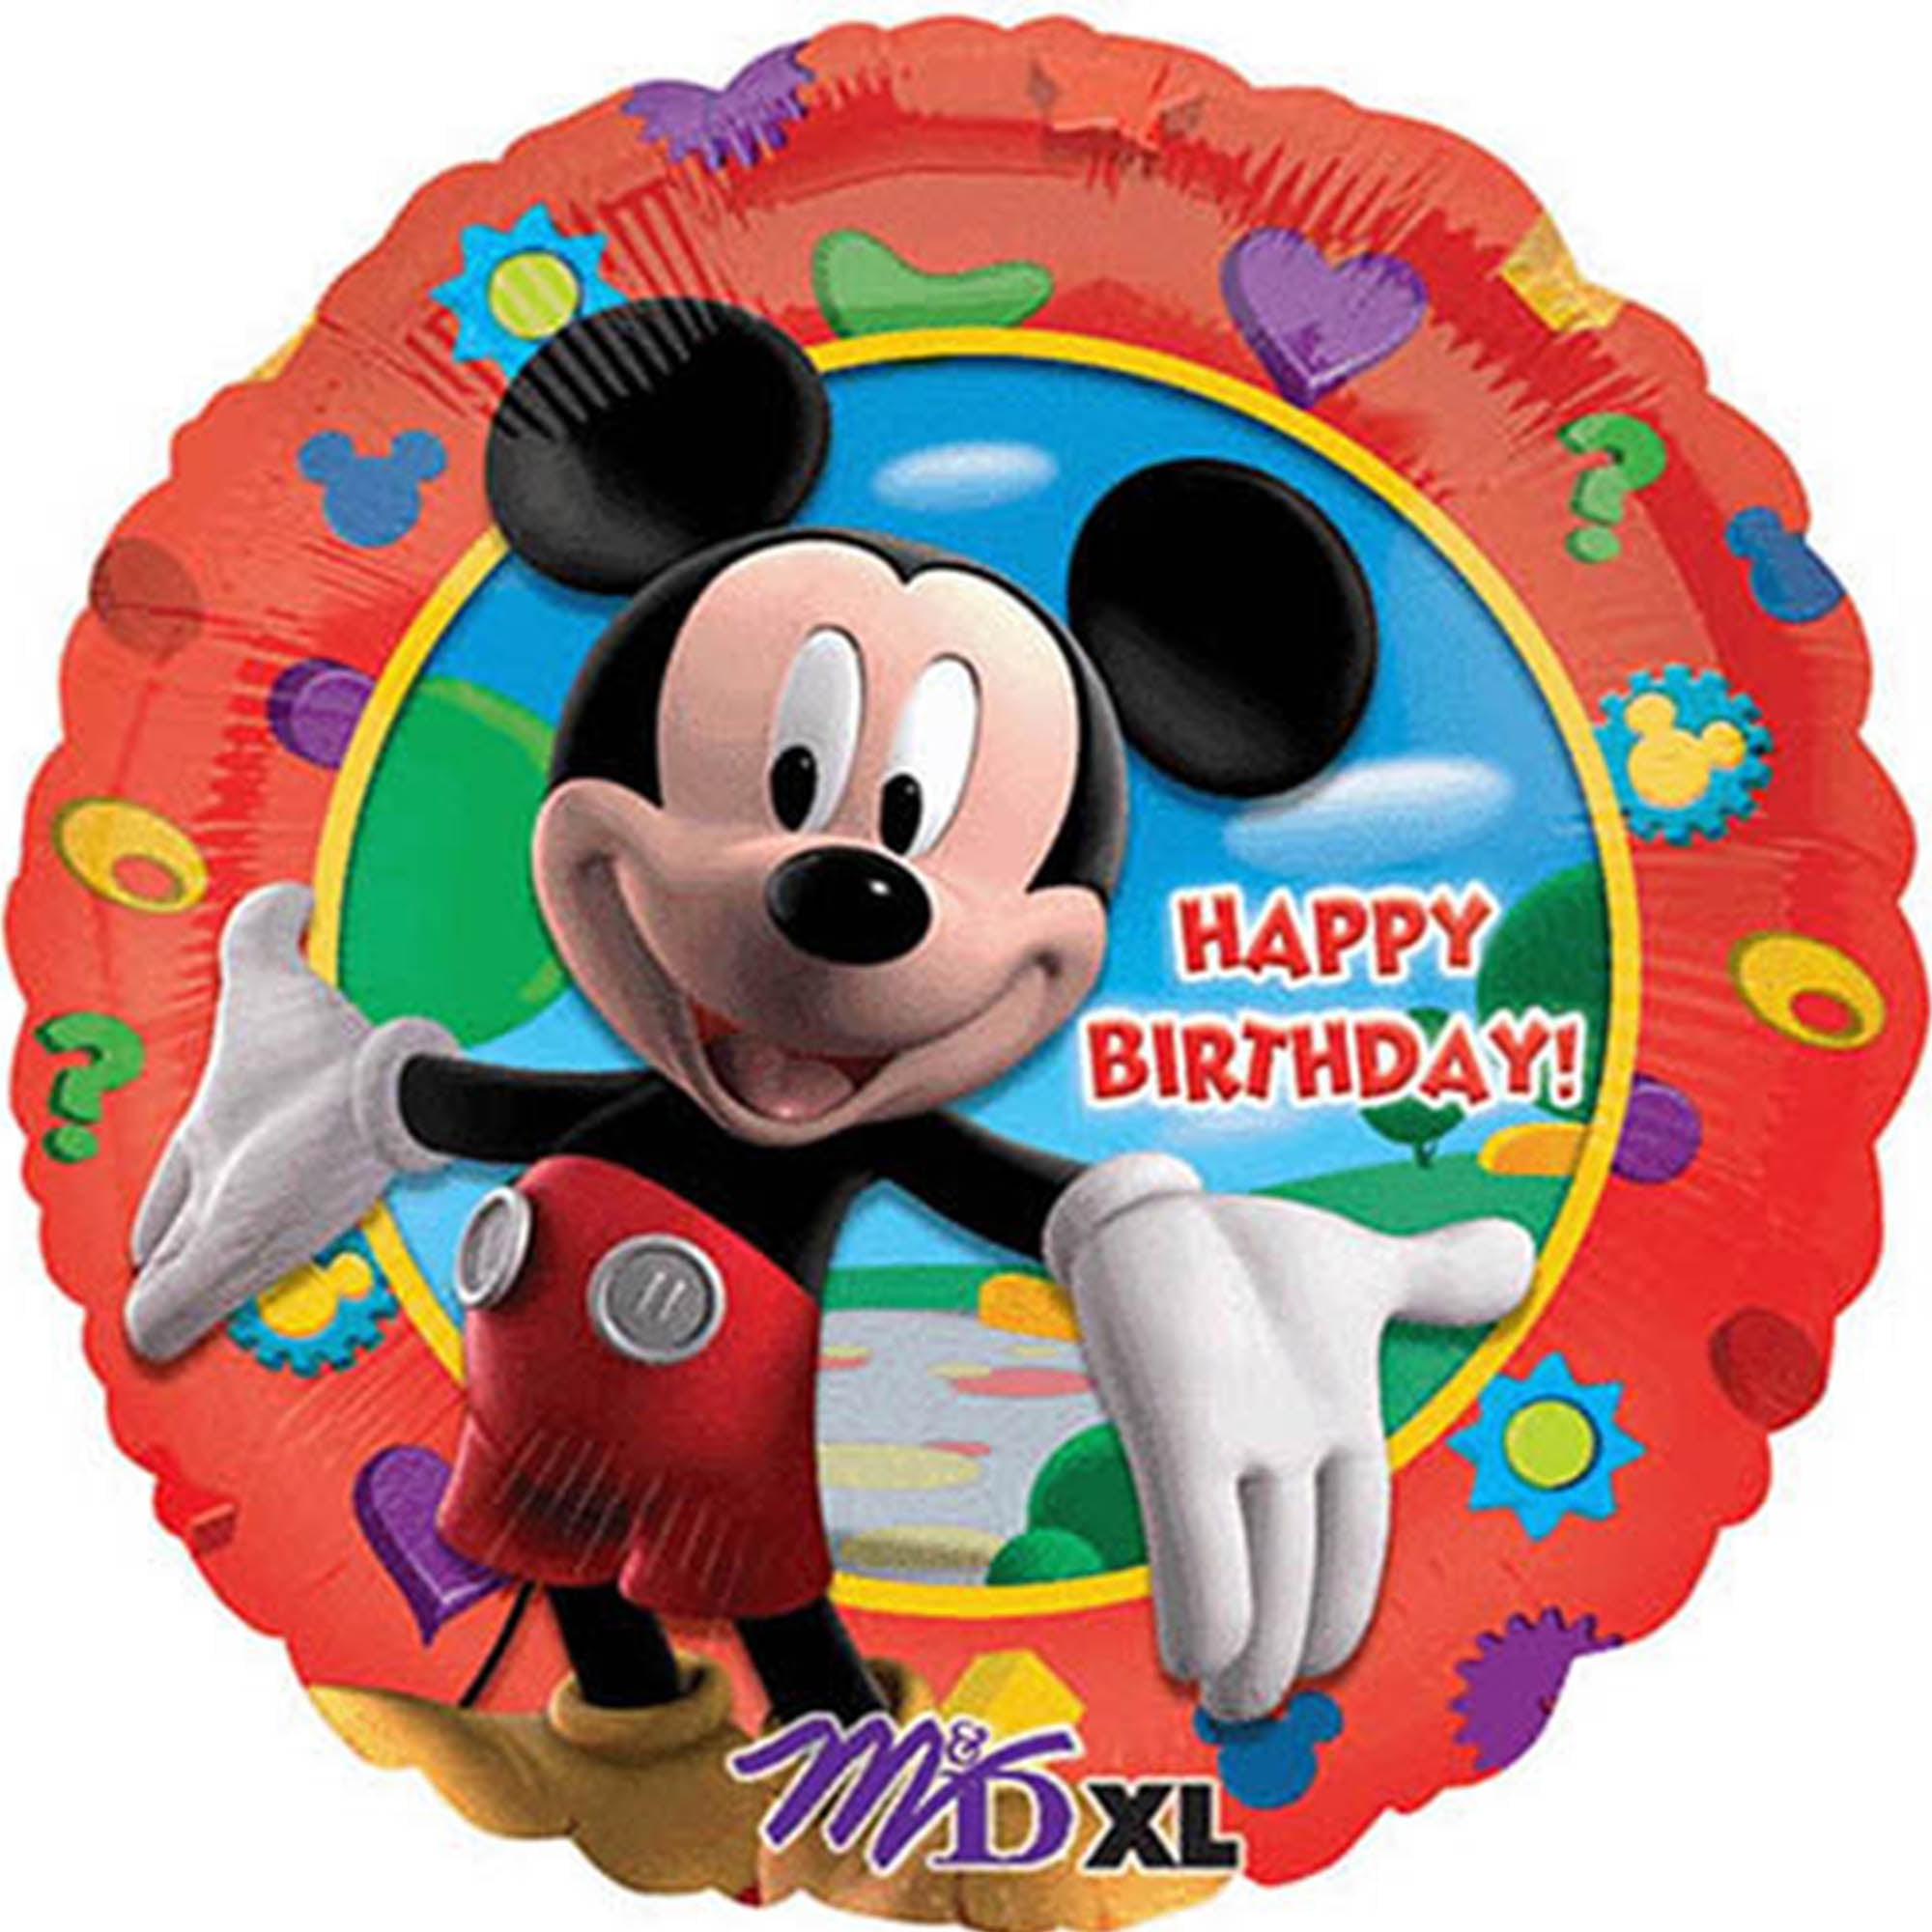 2 X 18" Mickey & Minnie Mouse party Foil Balloon 